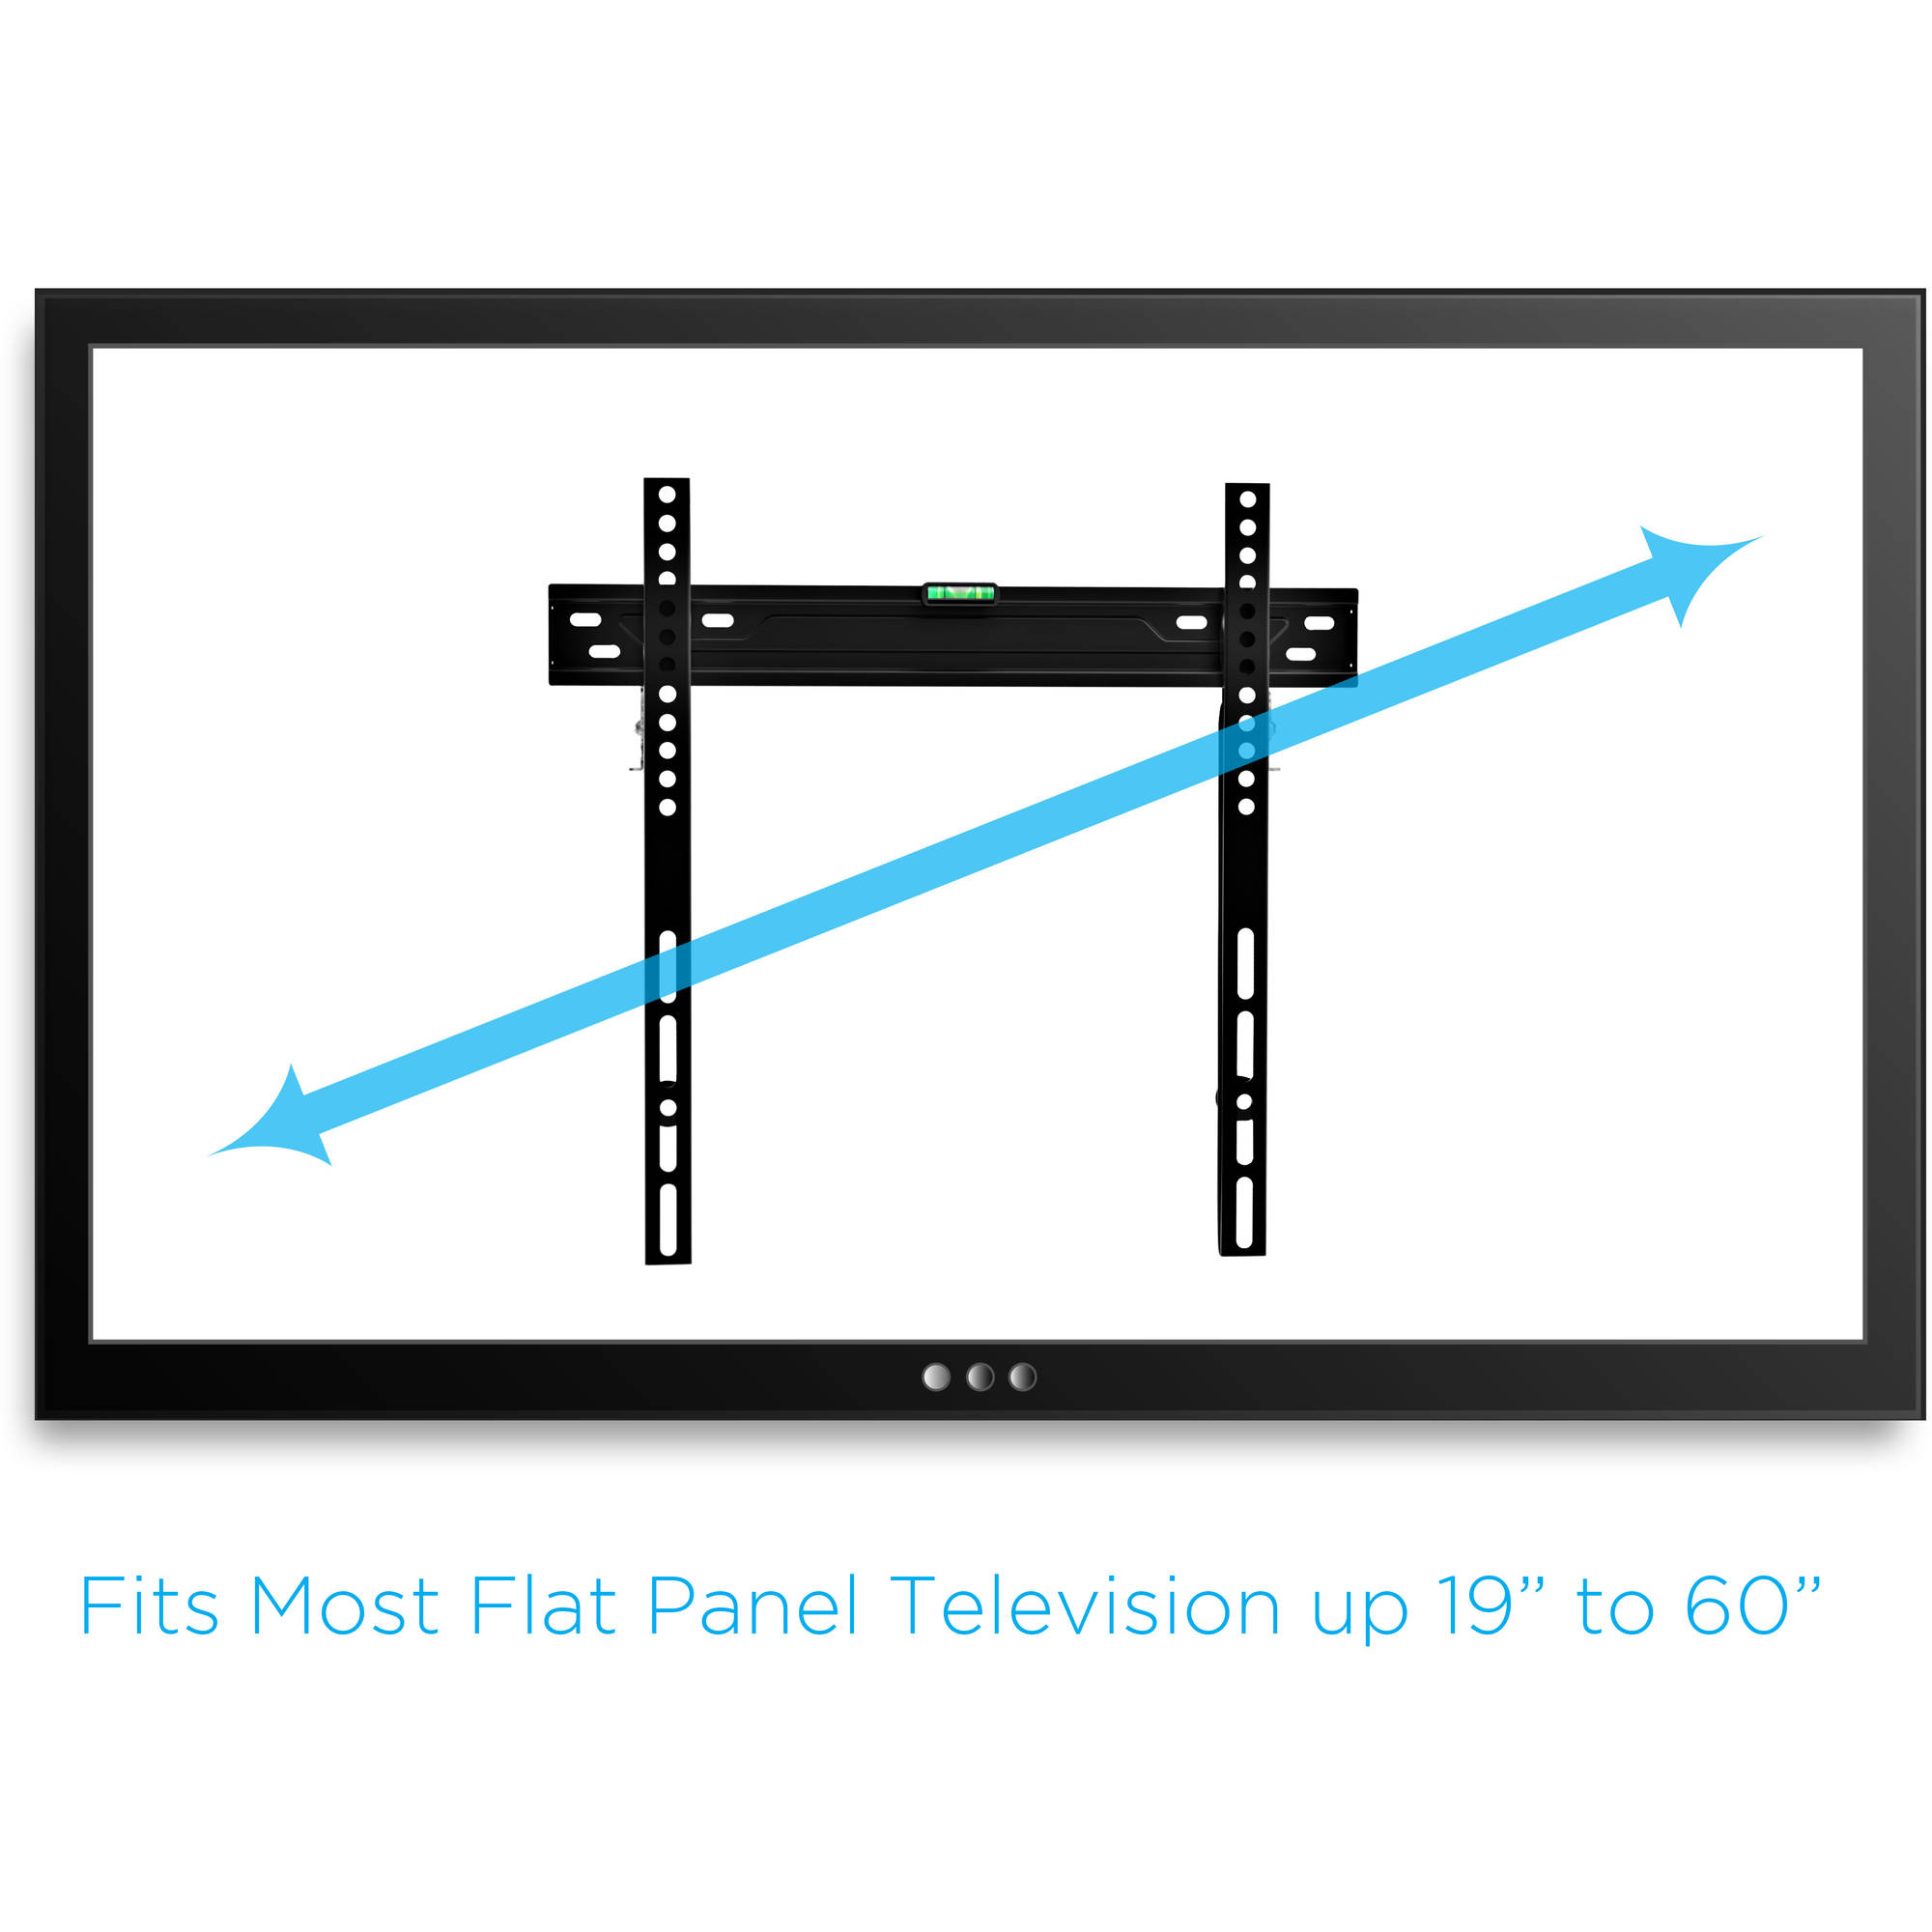 Low-Profile TV Wall Mount for 19"-60" TVs with HDMI Cable, UL Certified - image 3 of 8